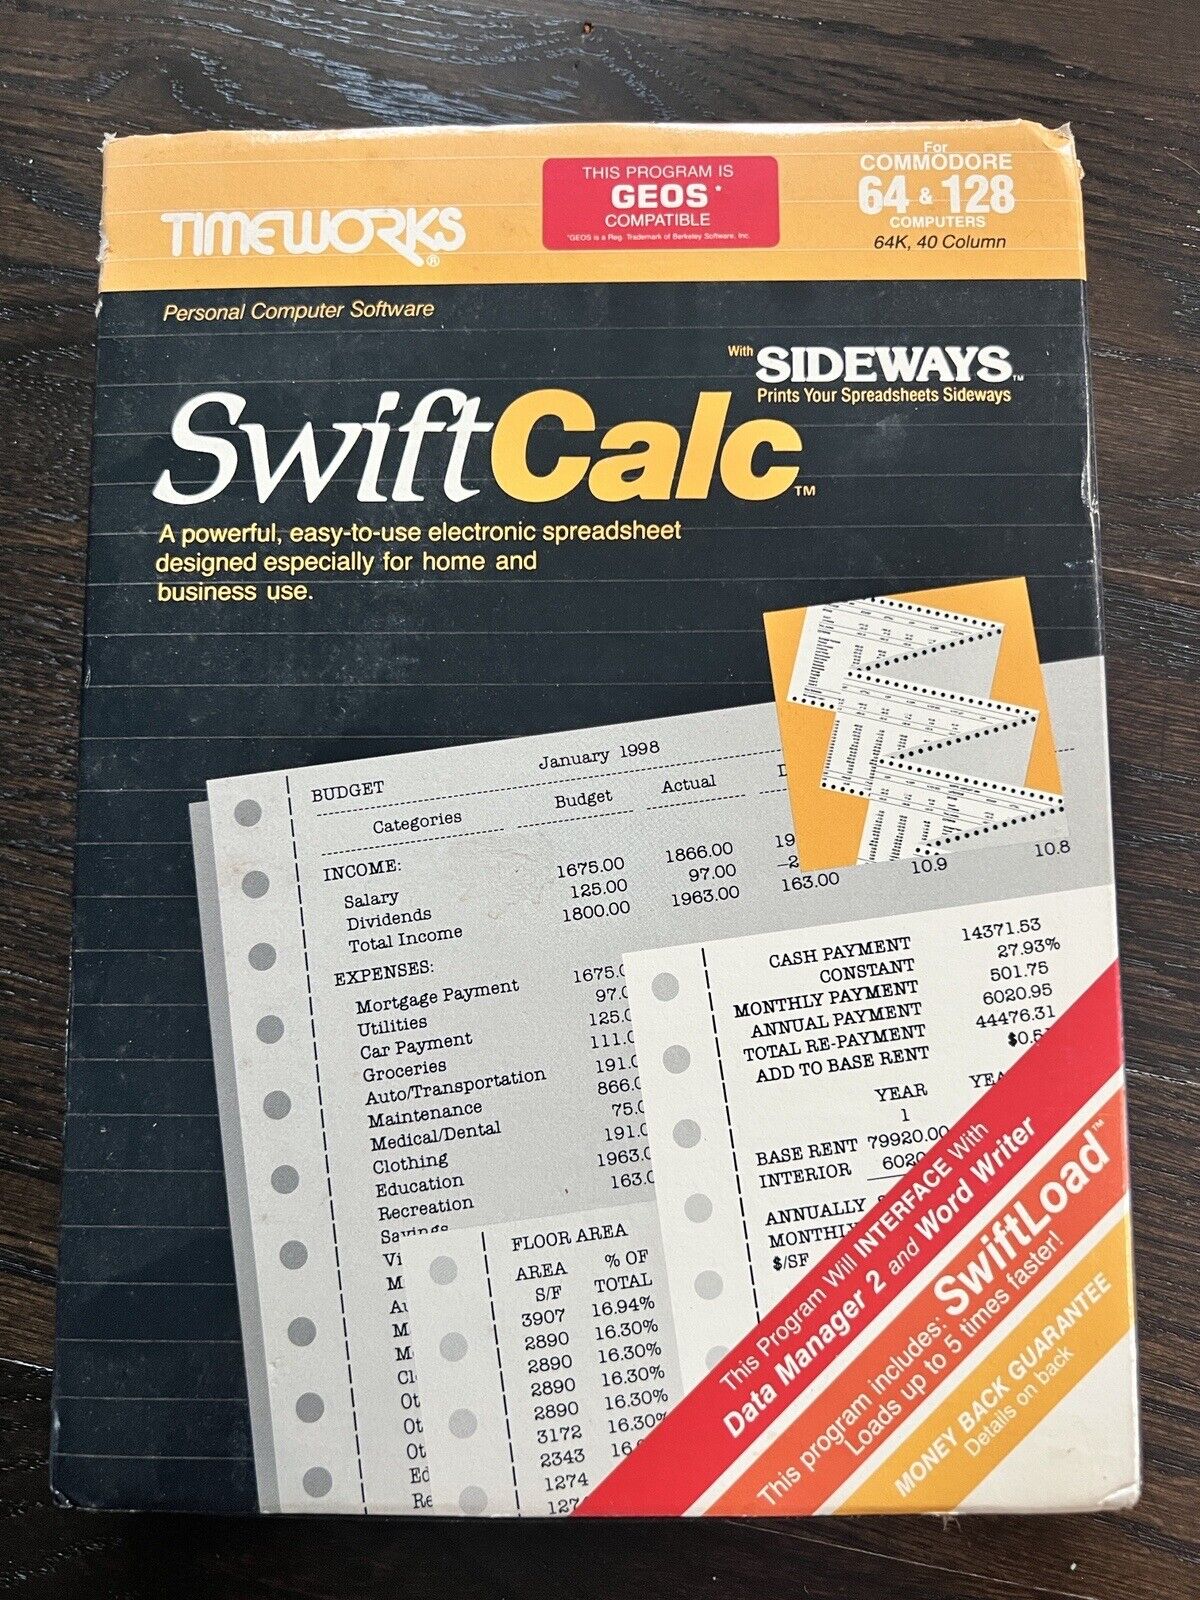 Timeworks SwiftCalc Commodore 64 & 128 W/ Original Box, Guide & Inserts UNTESTED